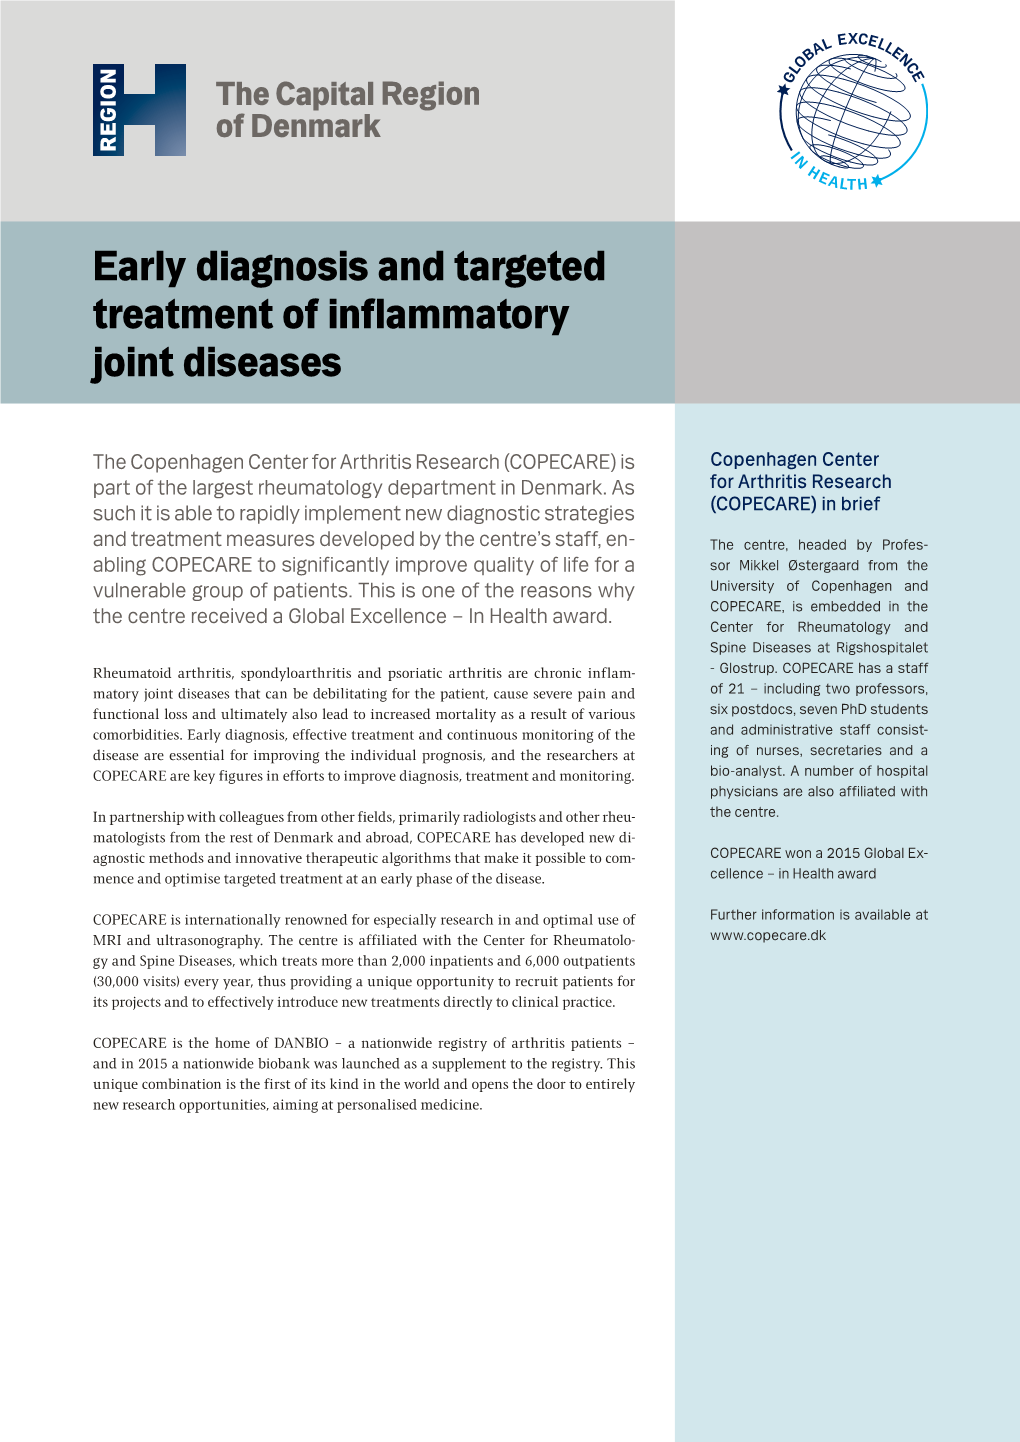 Early Diagnosis and Targeted Treatment of Inflammatory Joint Diseases